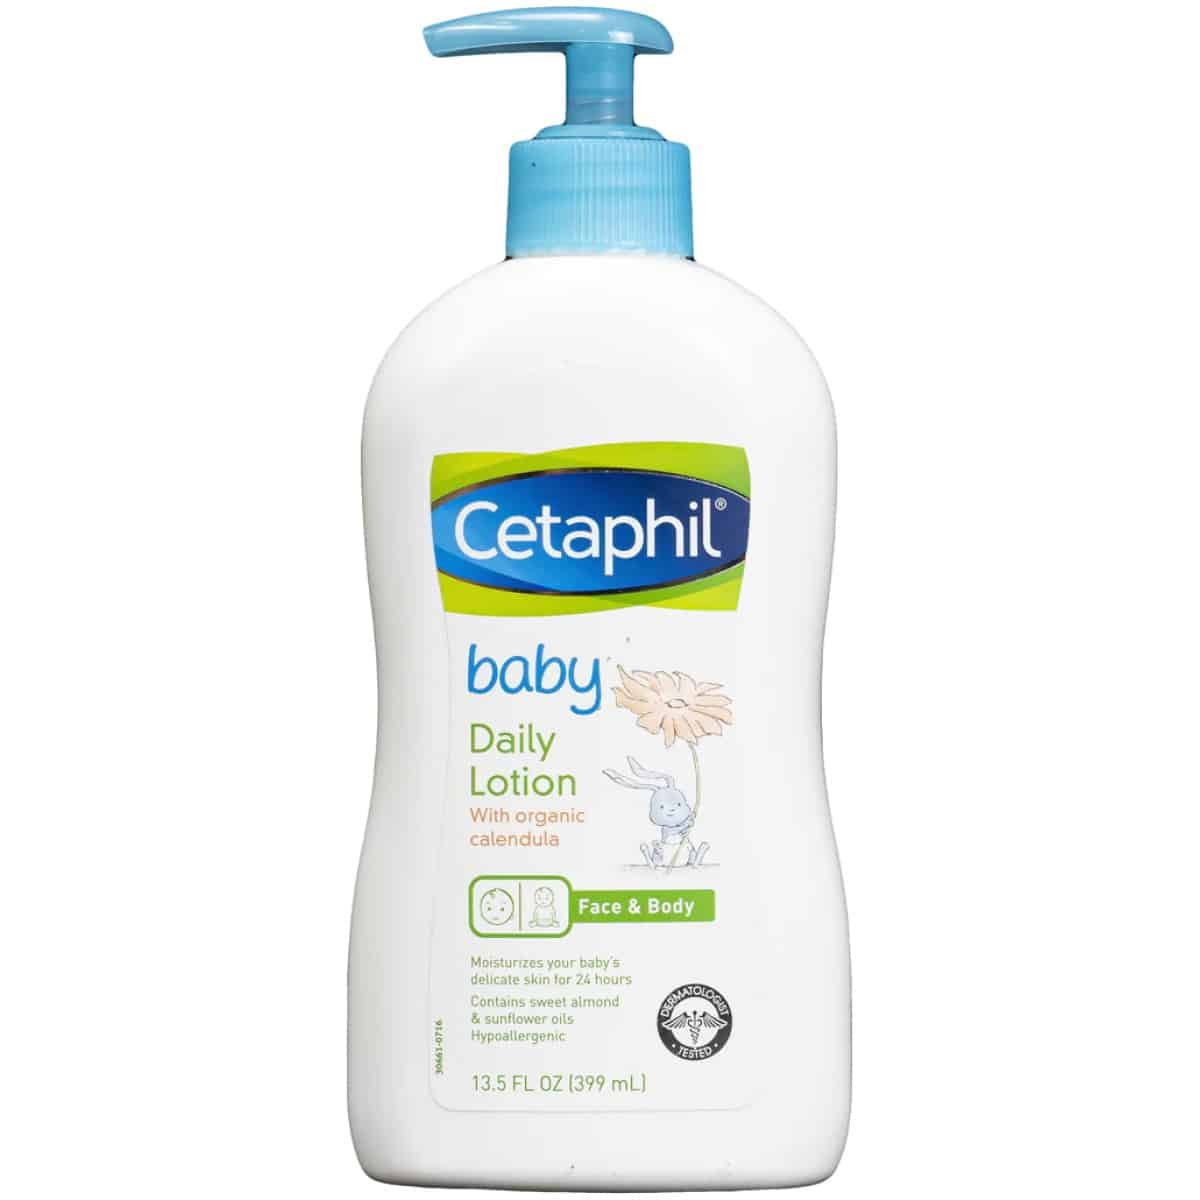 Cetaphil Baby Skin Care Gift Pack